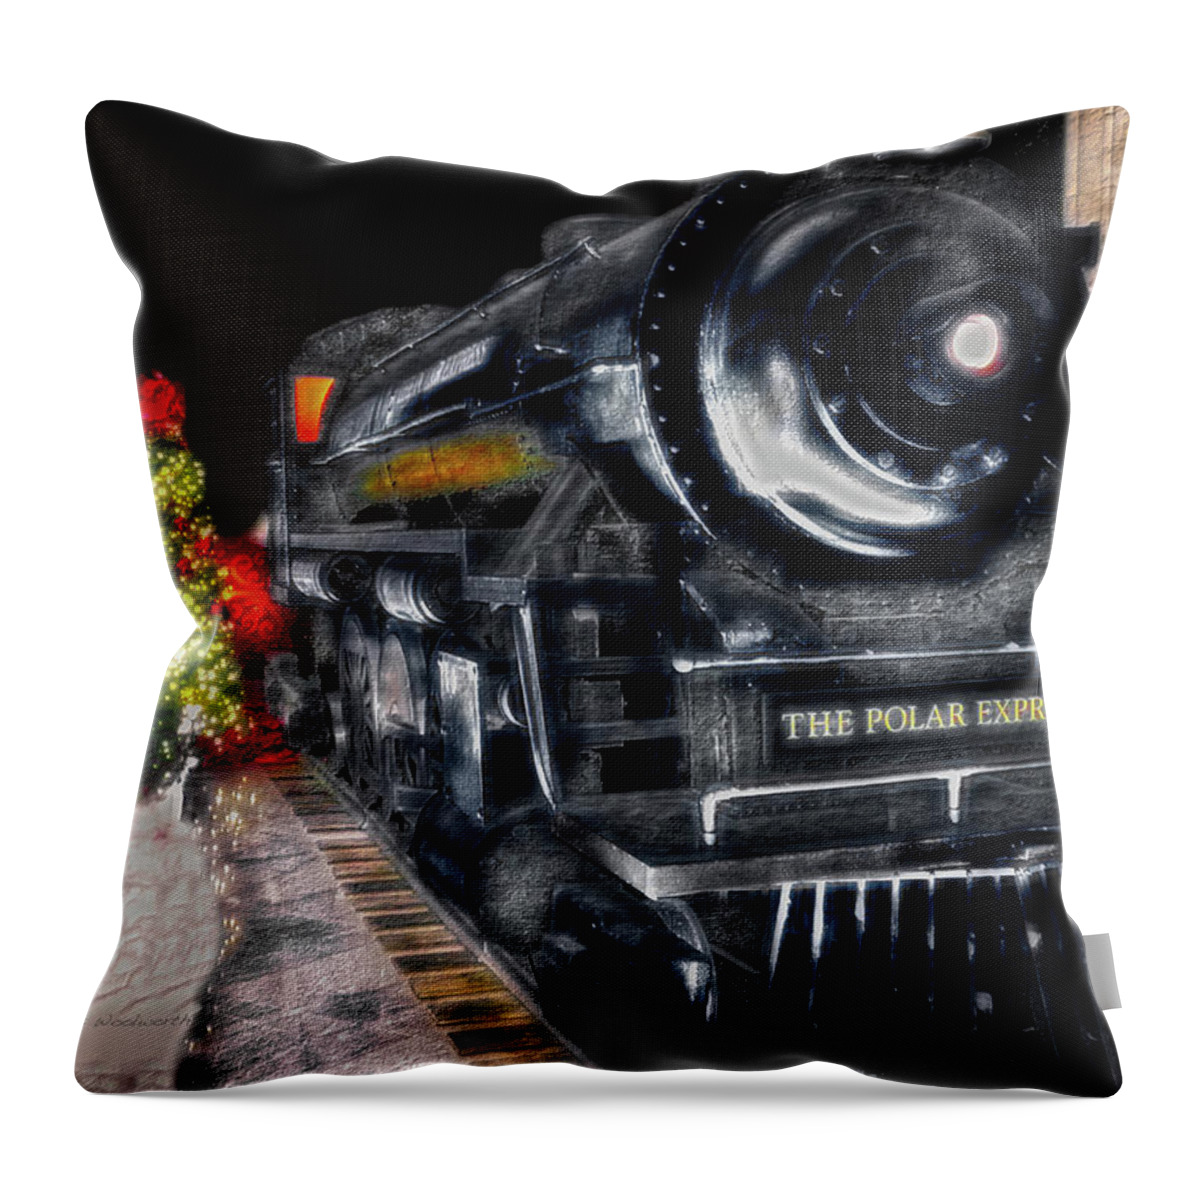 Polar Express Throw Pillow featuring the photograph Trains The Polar Express Arriving In Union Station by Thomas Woolworth